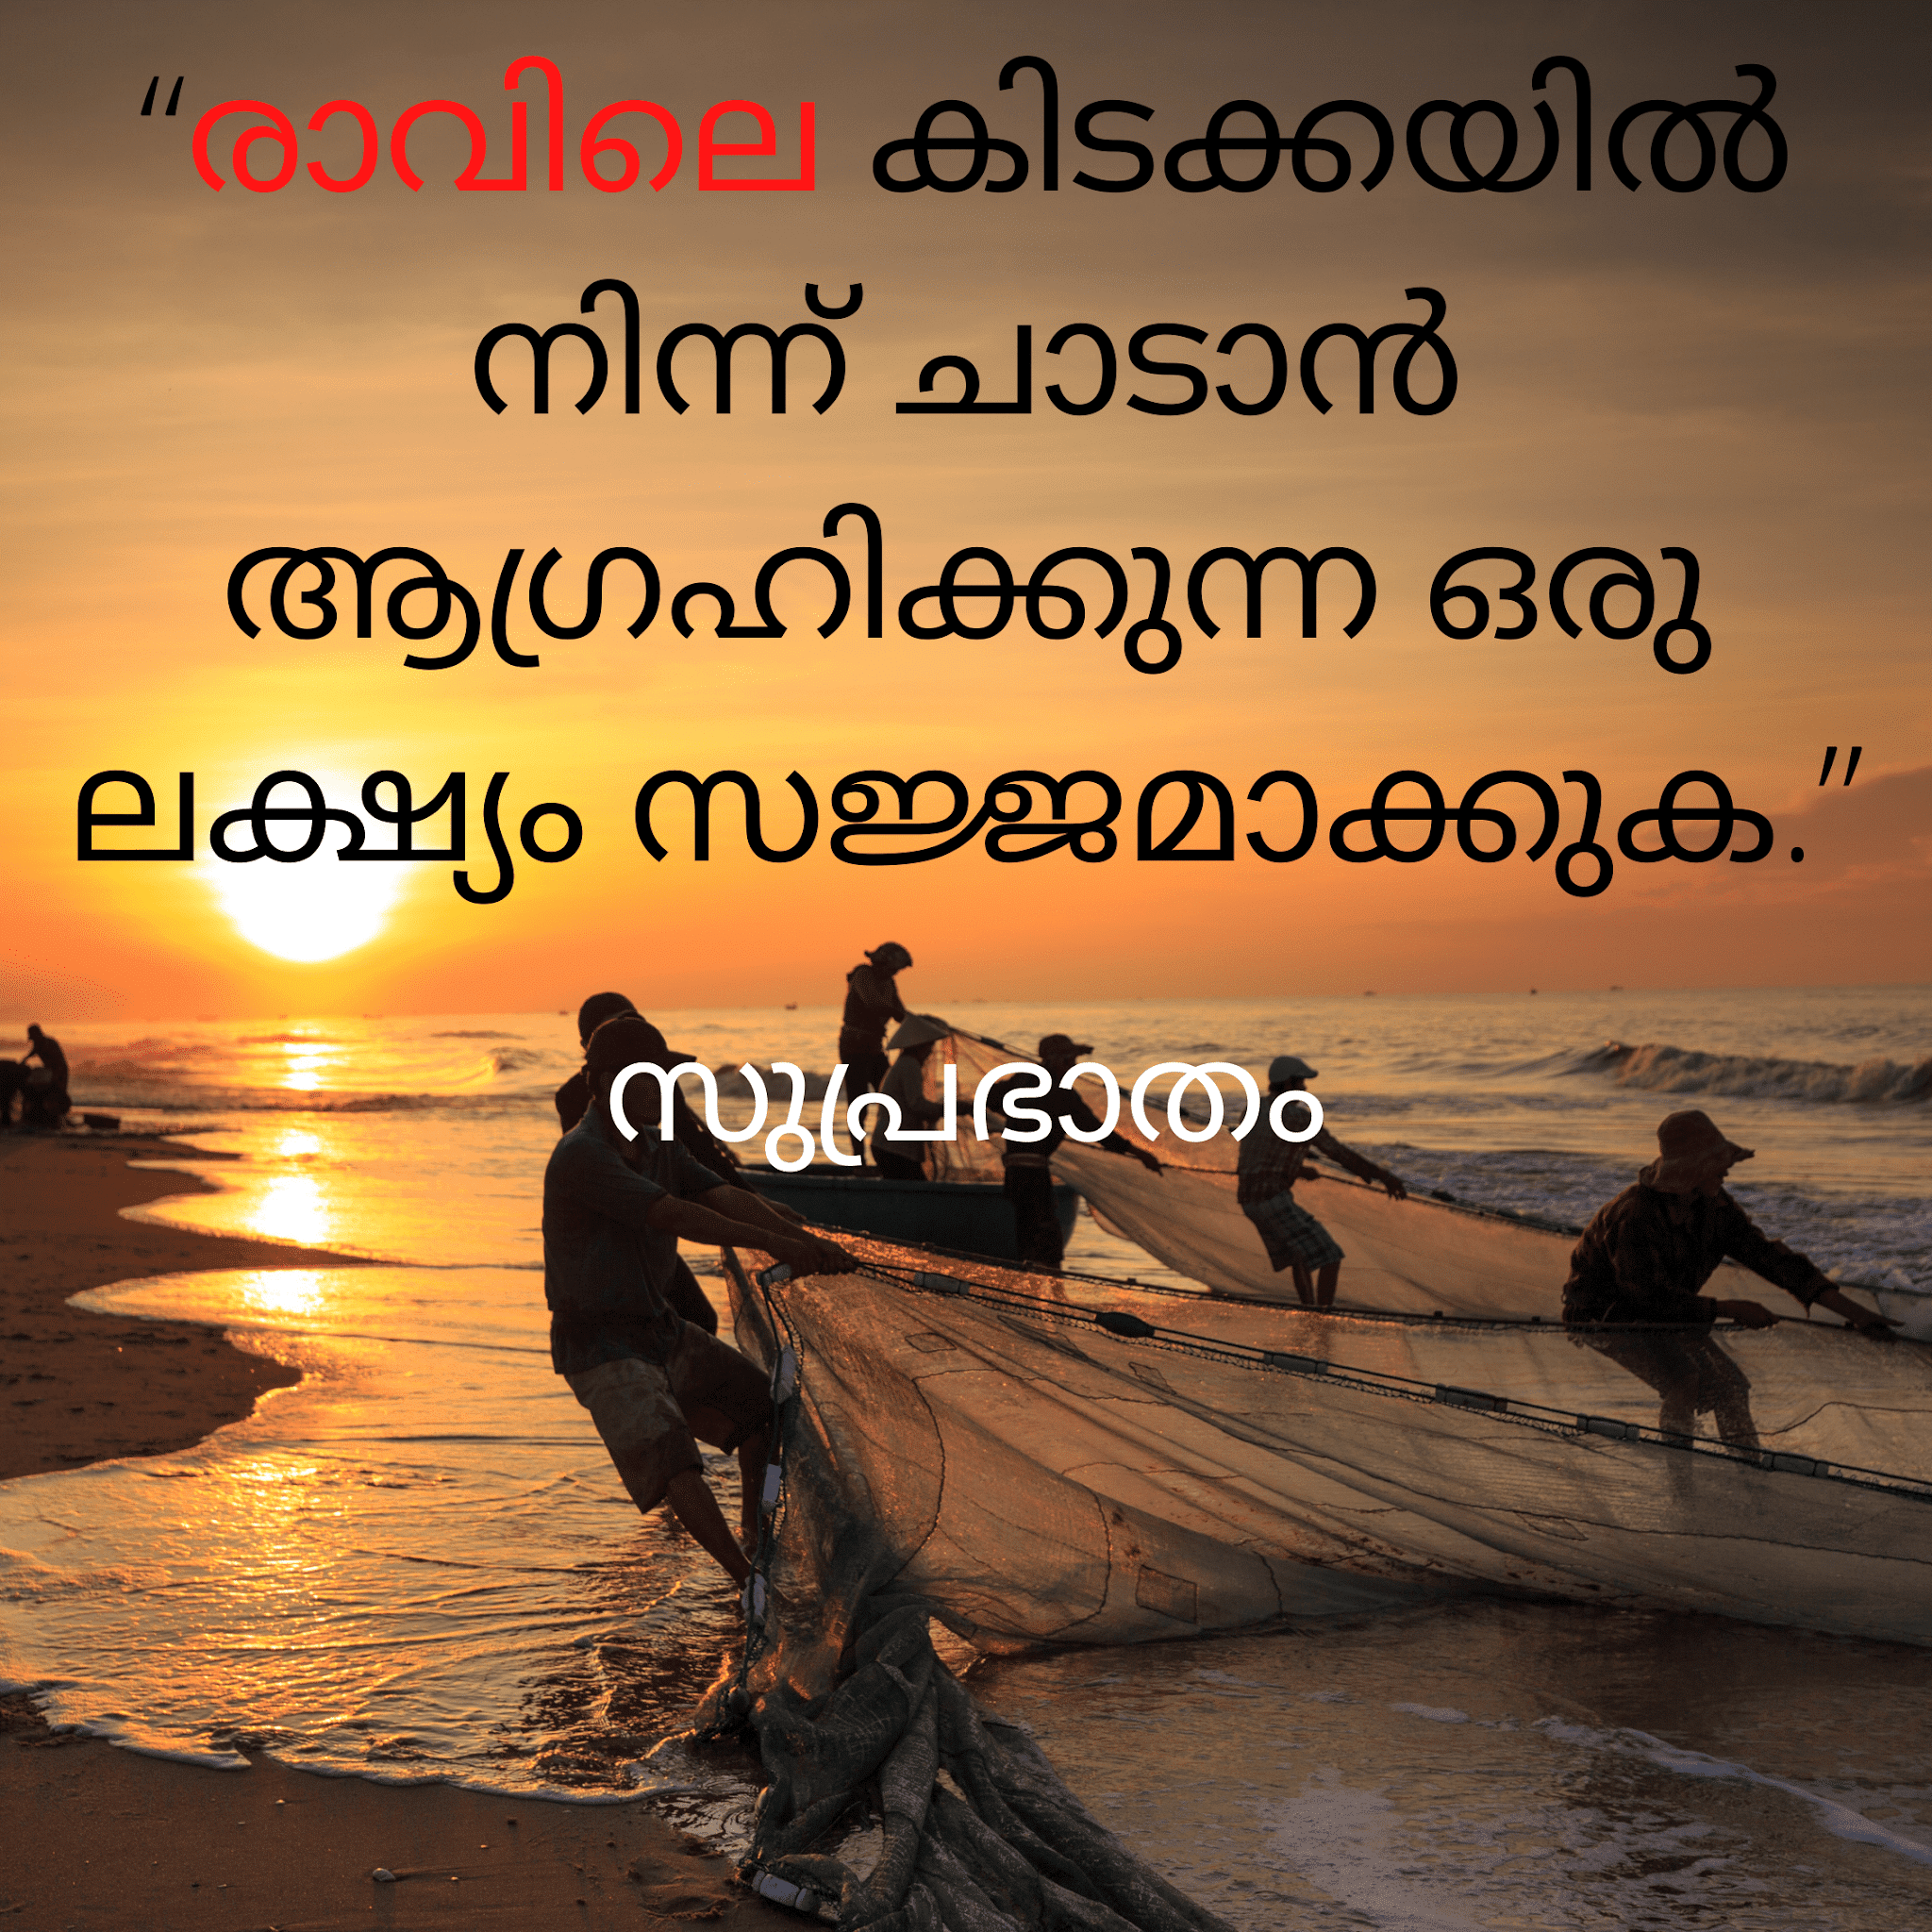 Good Morning Images In Malayalam Good morning malayalam quotes with free images downloads 2020